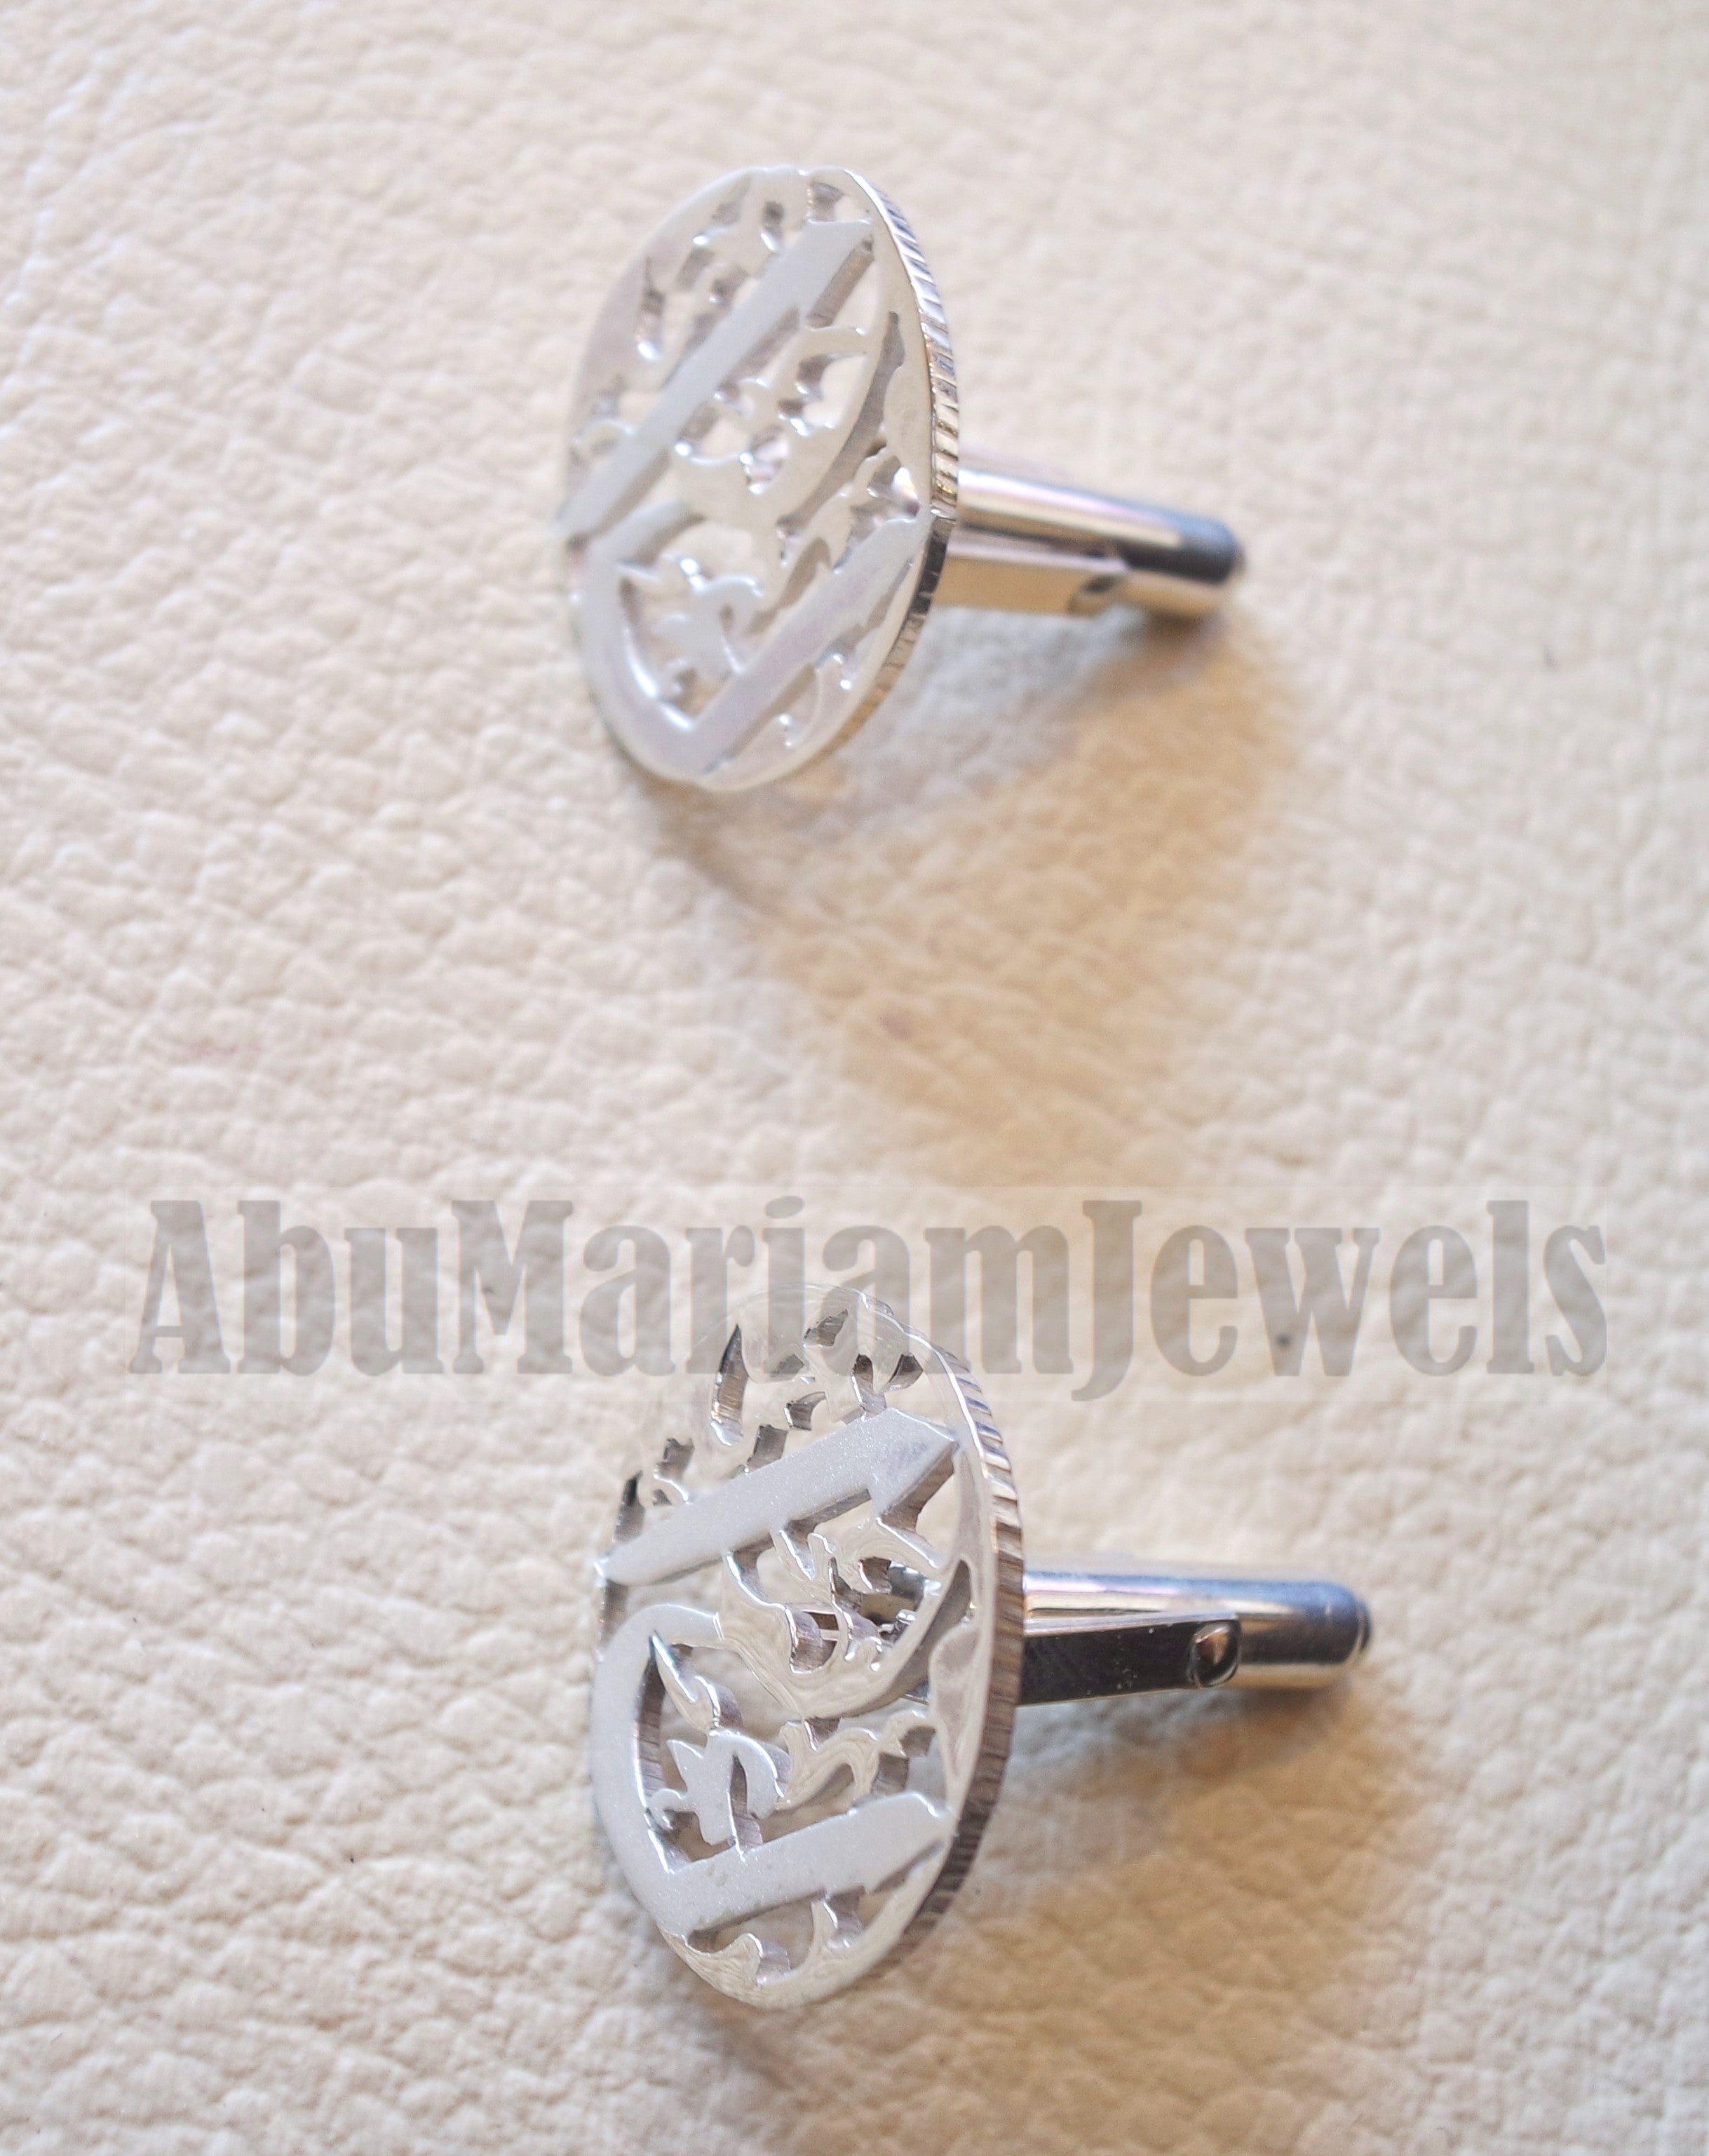 cufflinks , cuflinks 2 words on piece calligraphy arabic customized any name made to order sterling silver 925 heavy men jewelry عربي CF13